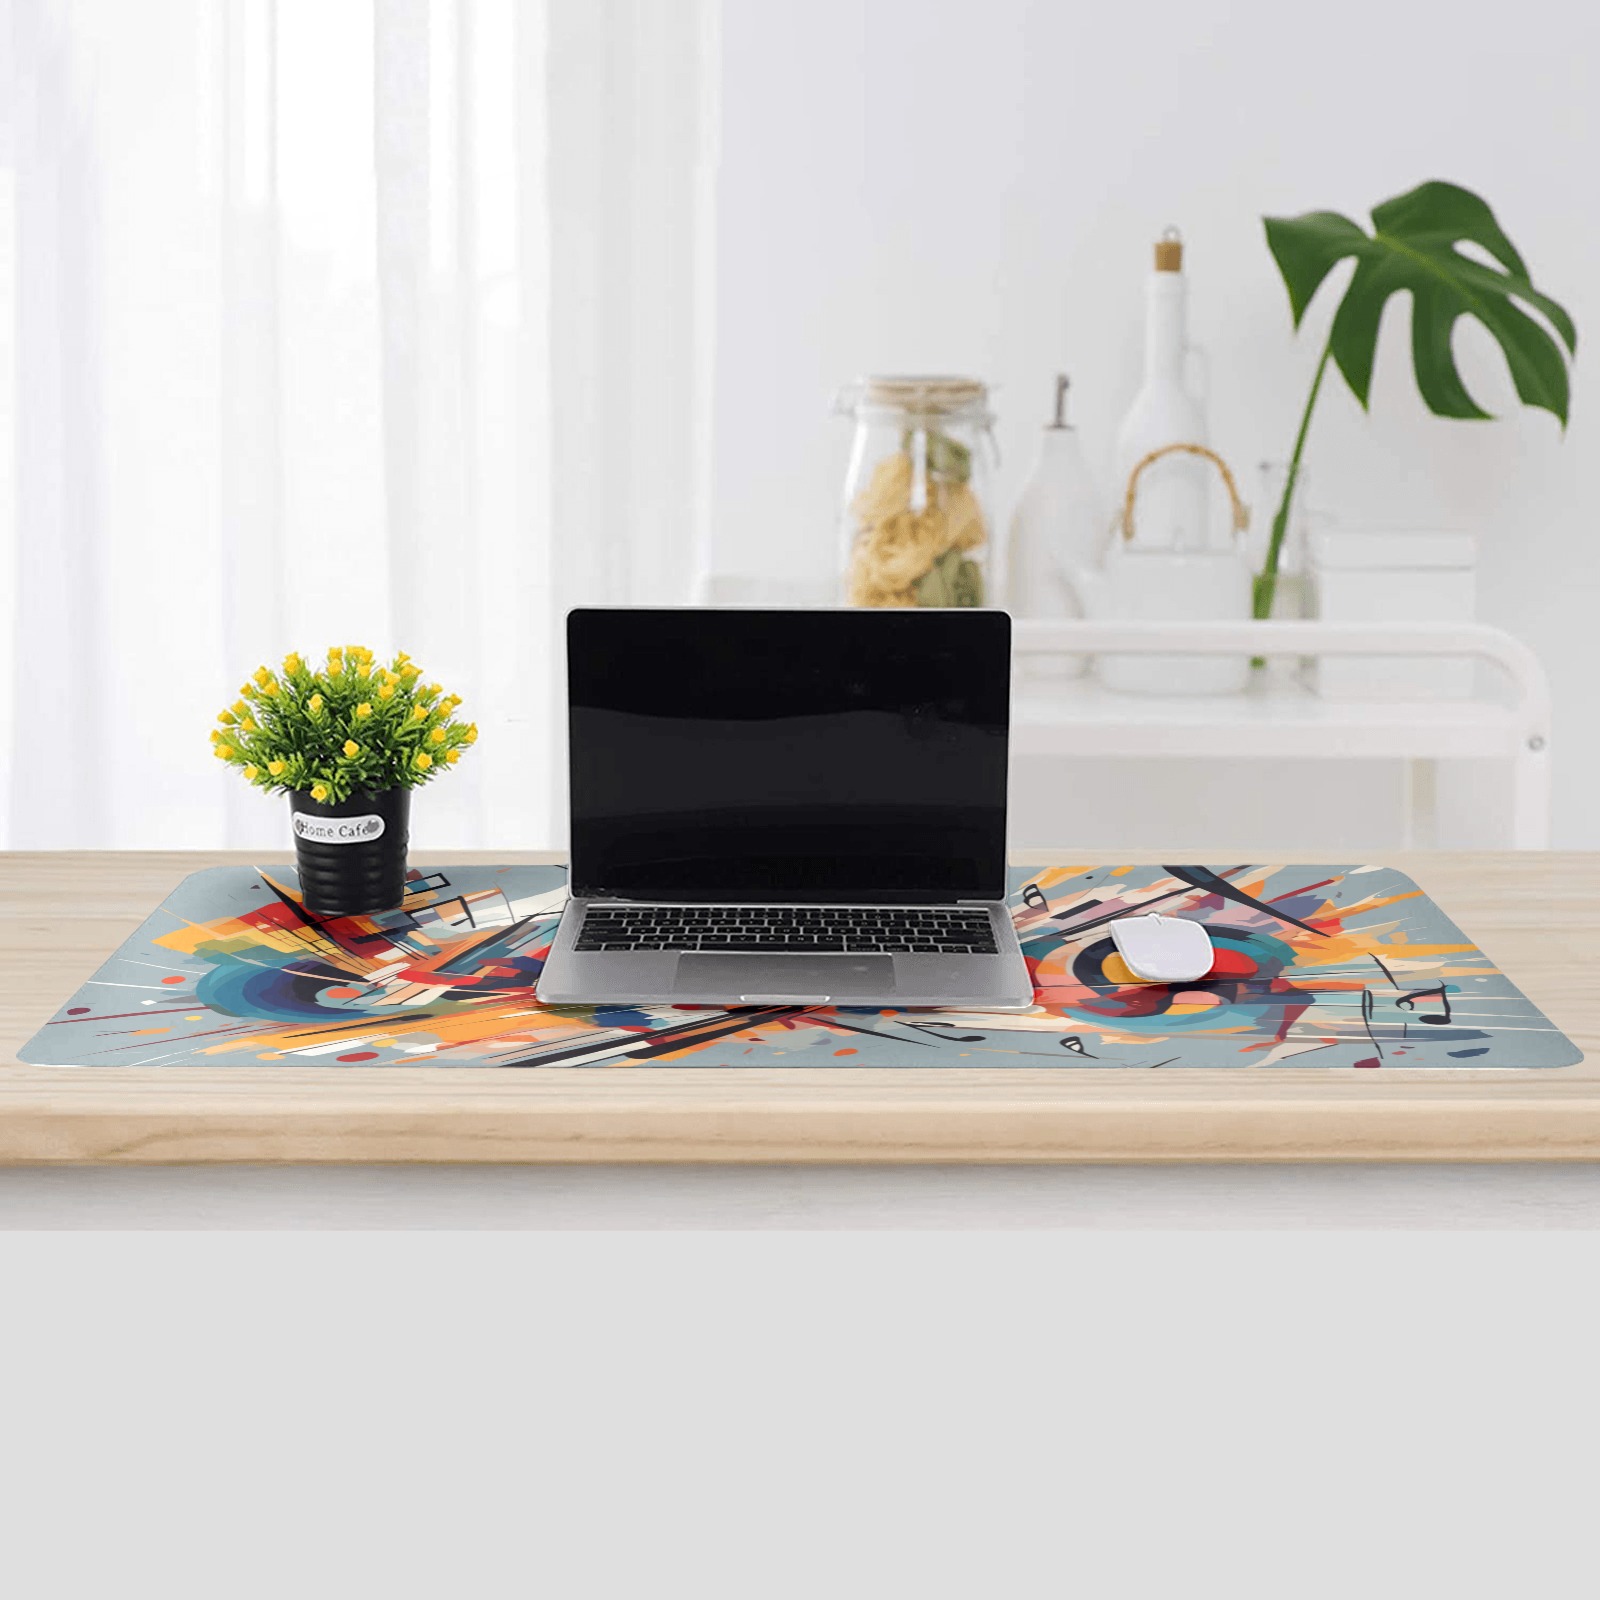 Music and notes. Charming colorful abstract art Gaming Mousepad (35"x16")